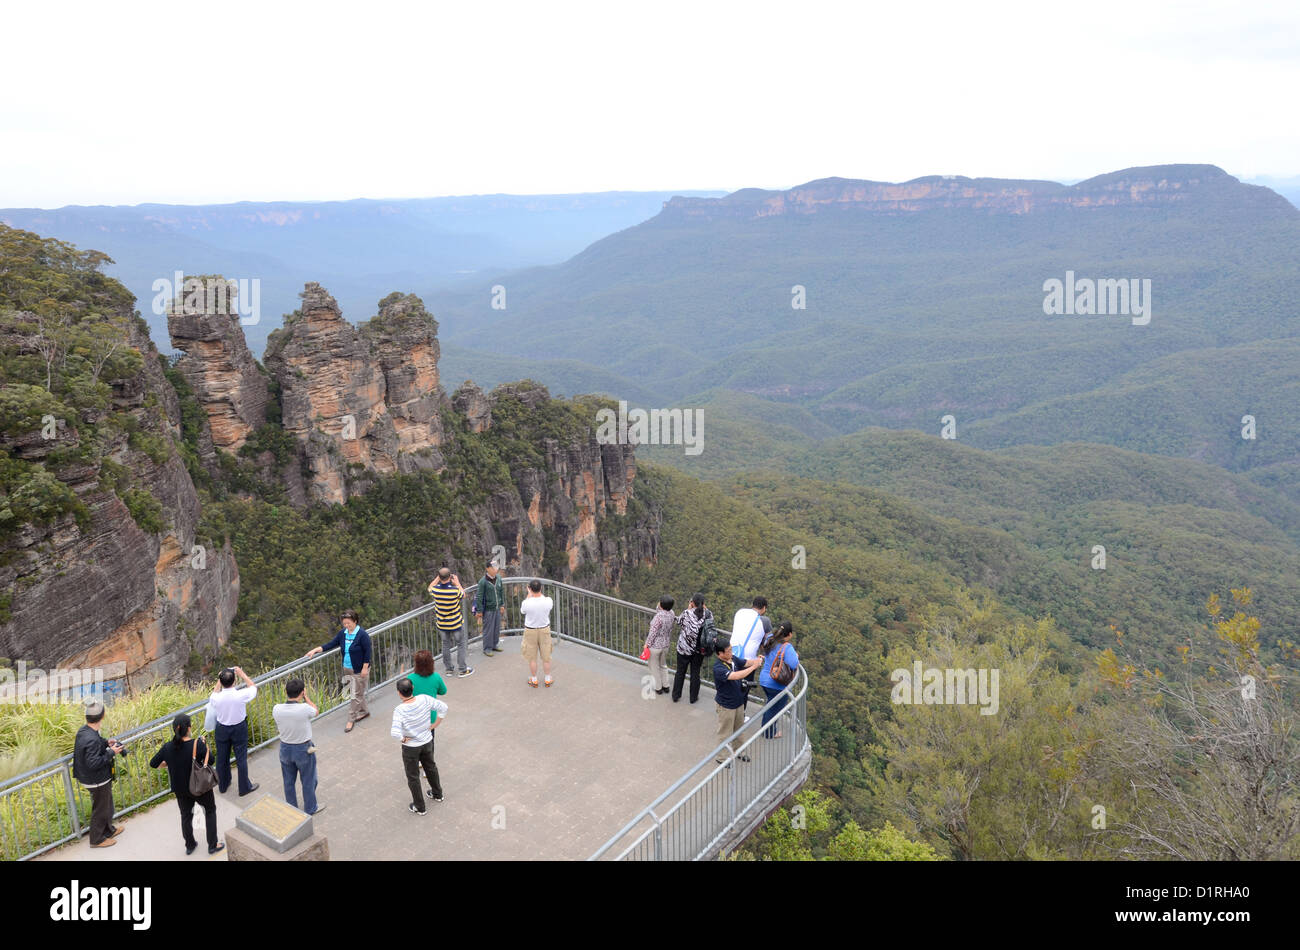 KATOOMBA, Australia - Tourists stand on one of the viewing platfooms at Echo Point in the Blue Mountains overlooking the rock formation known as the Three Sisters. Katoomba, New South Wales, Australia. Stock Photo